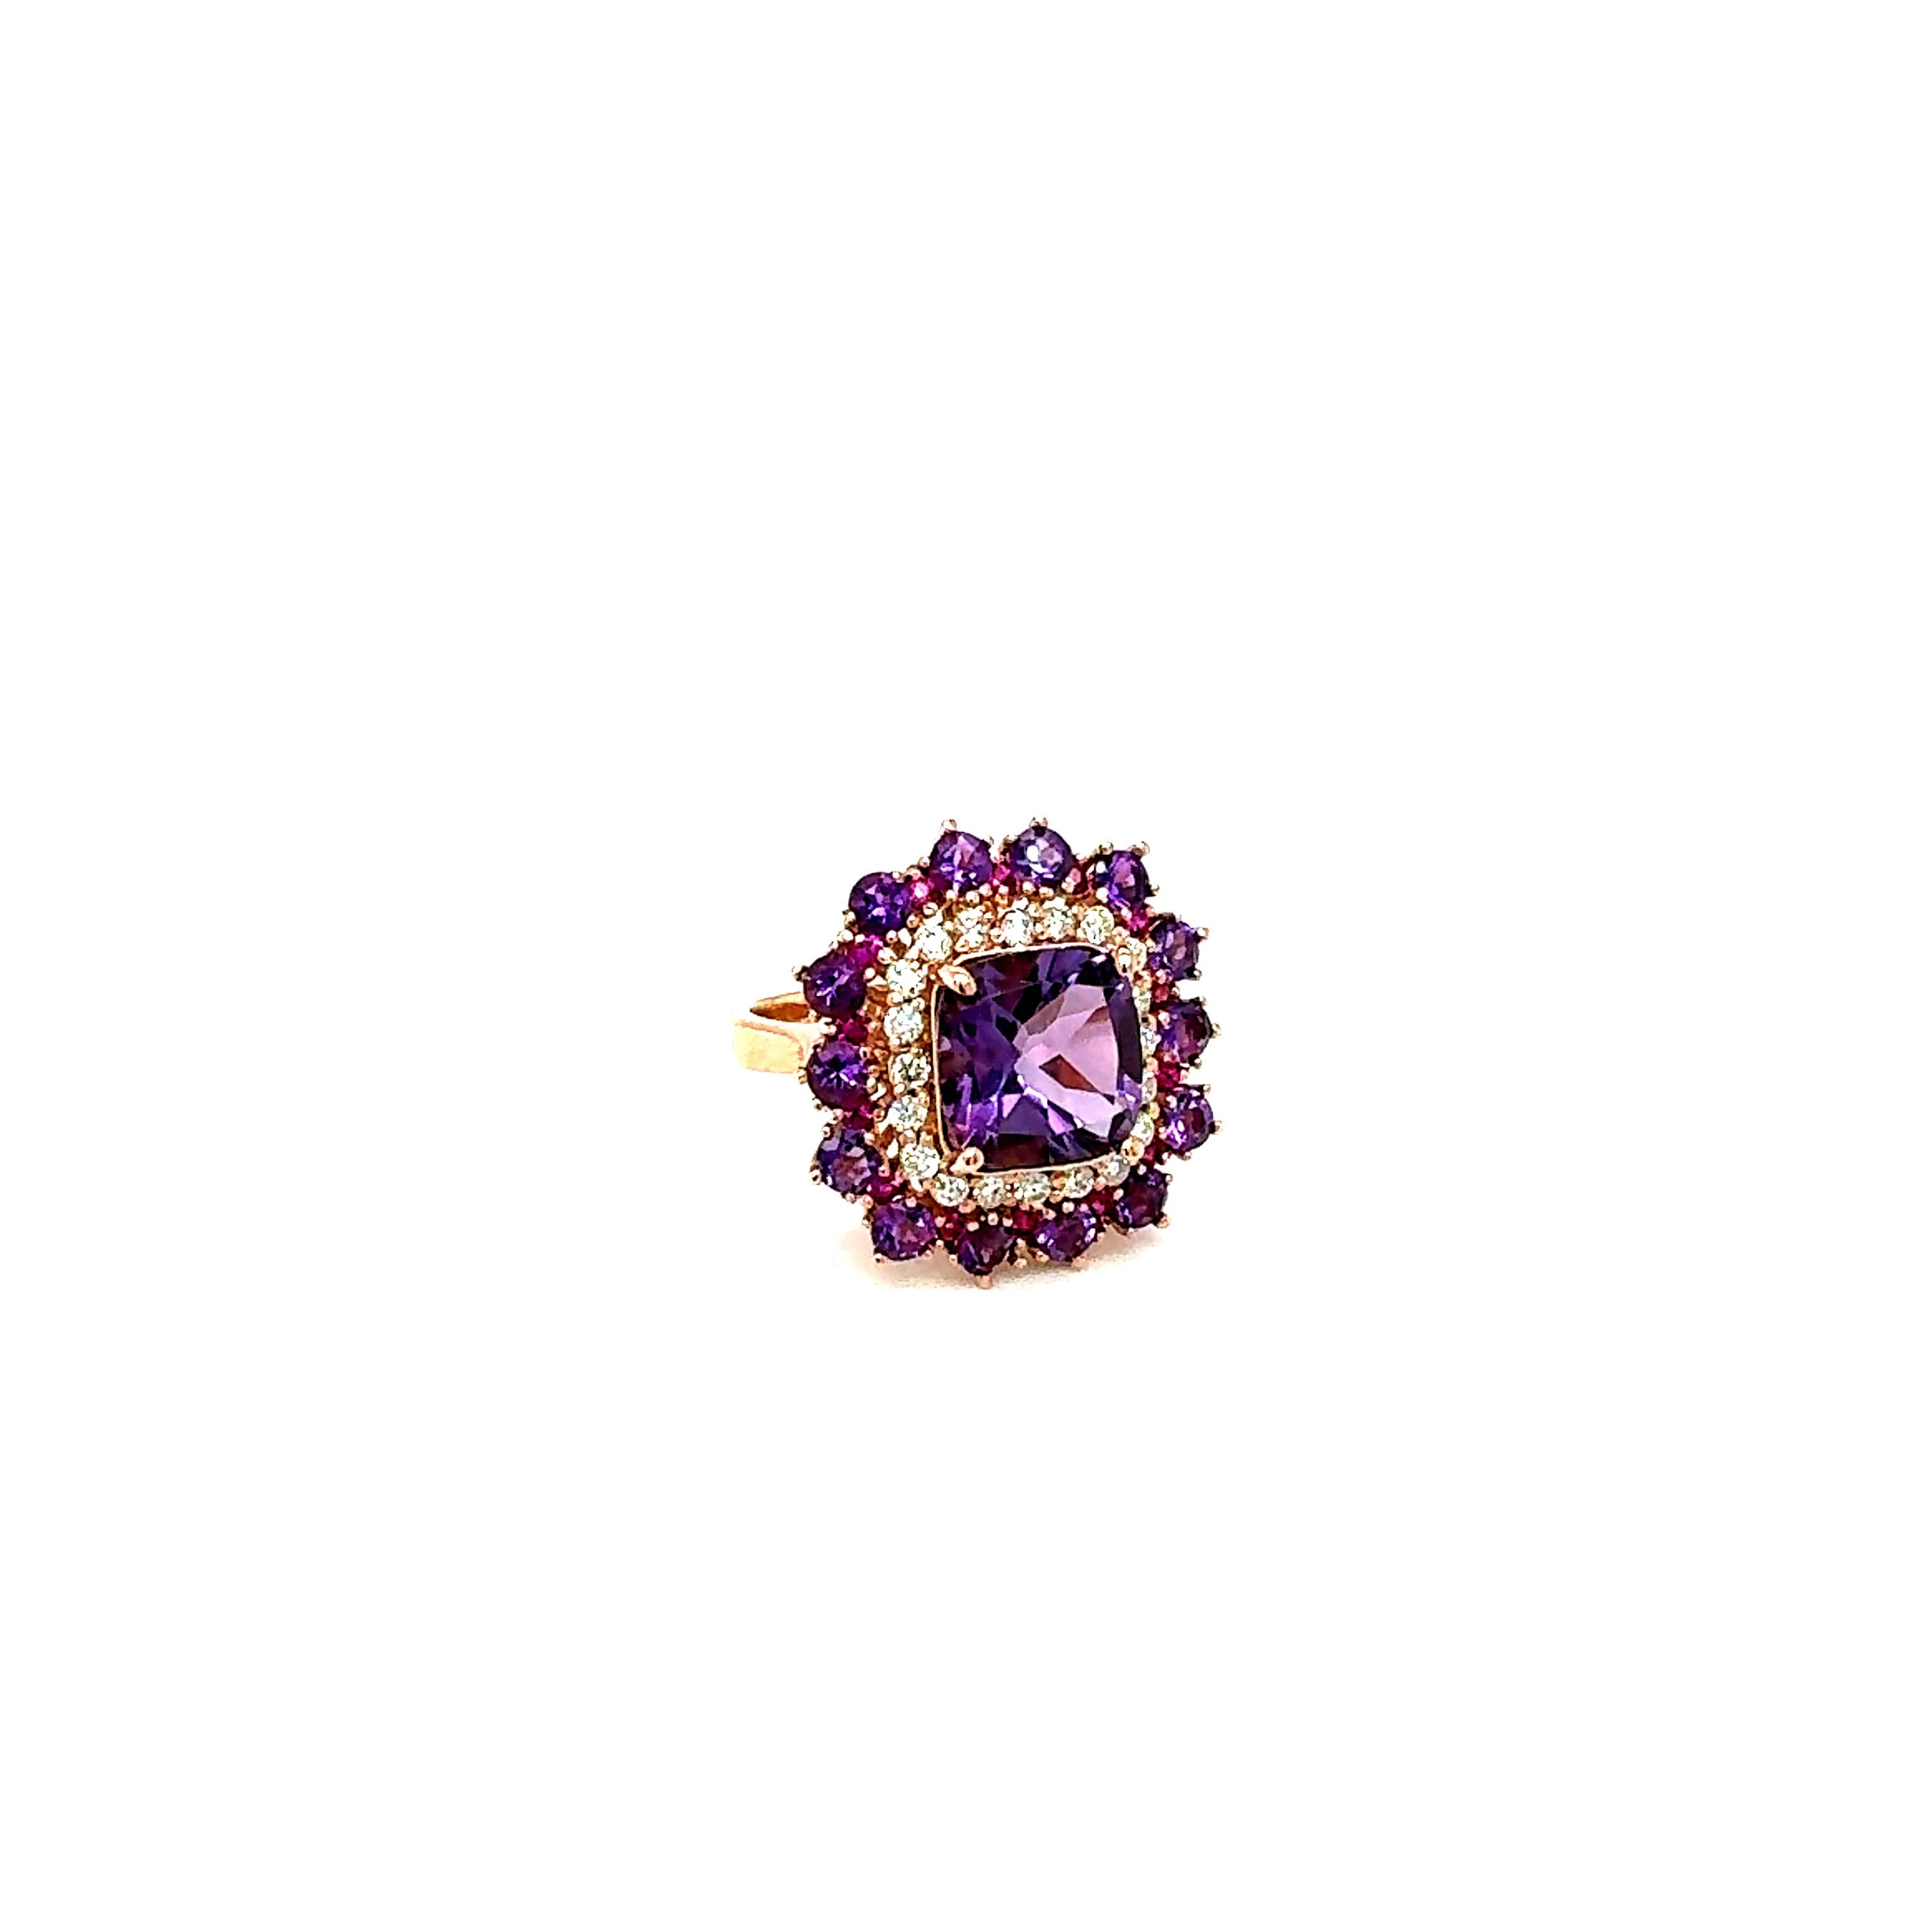 Contemporary 5.67 Carat Cushion Cut Amethyst Pink Sapphire Diamond Rose Gold Cocktail Ring For Sale